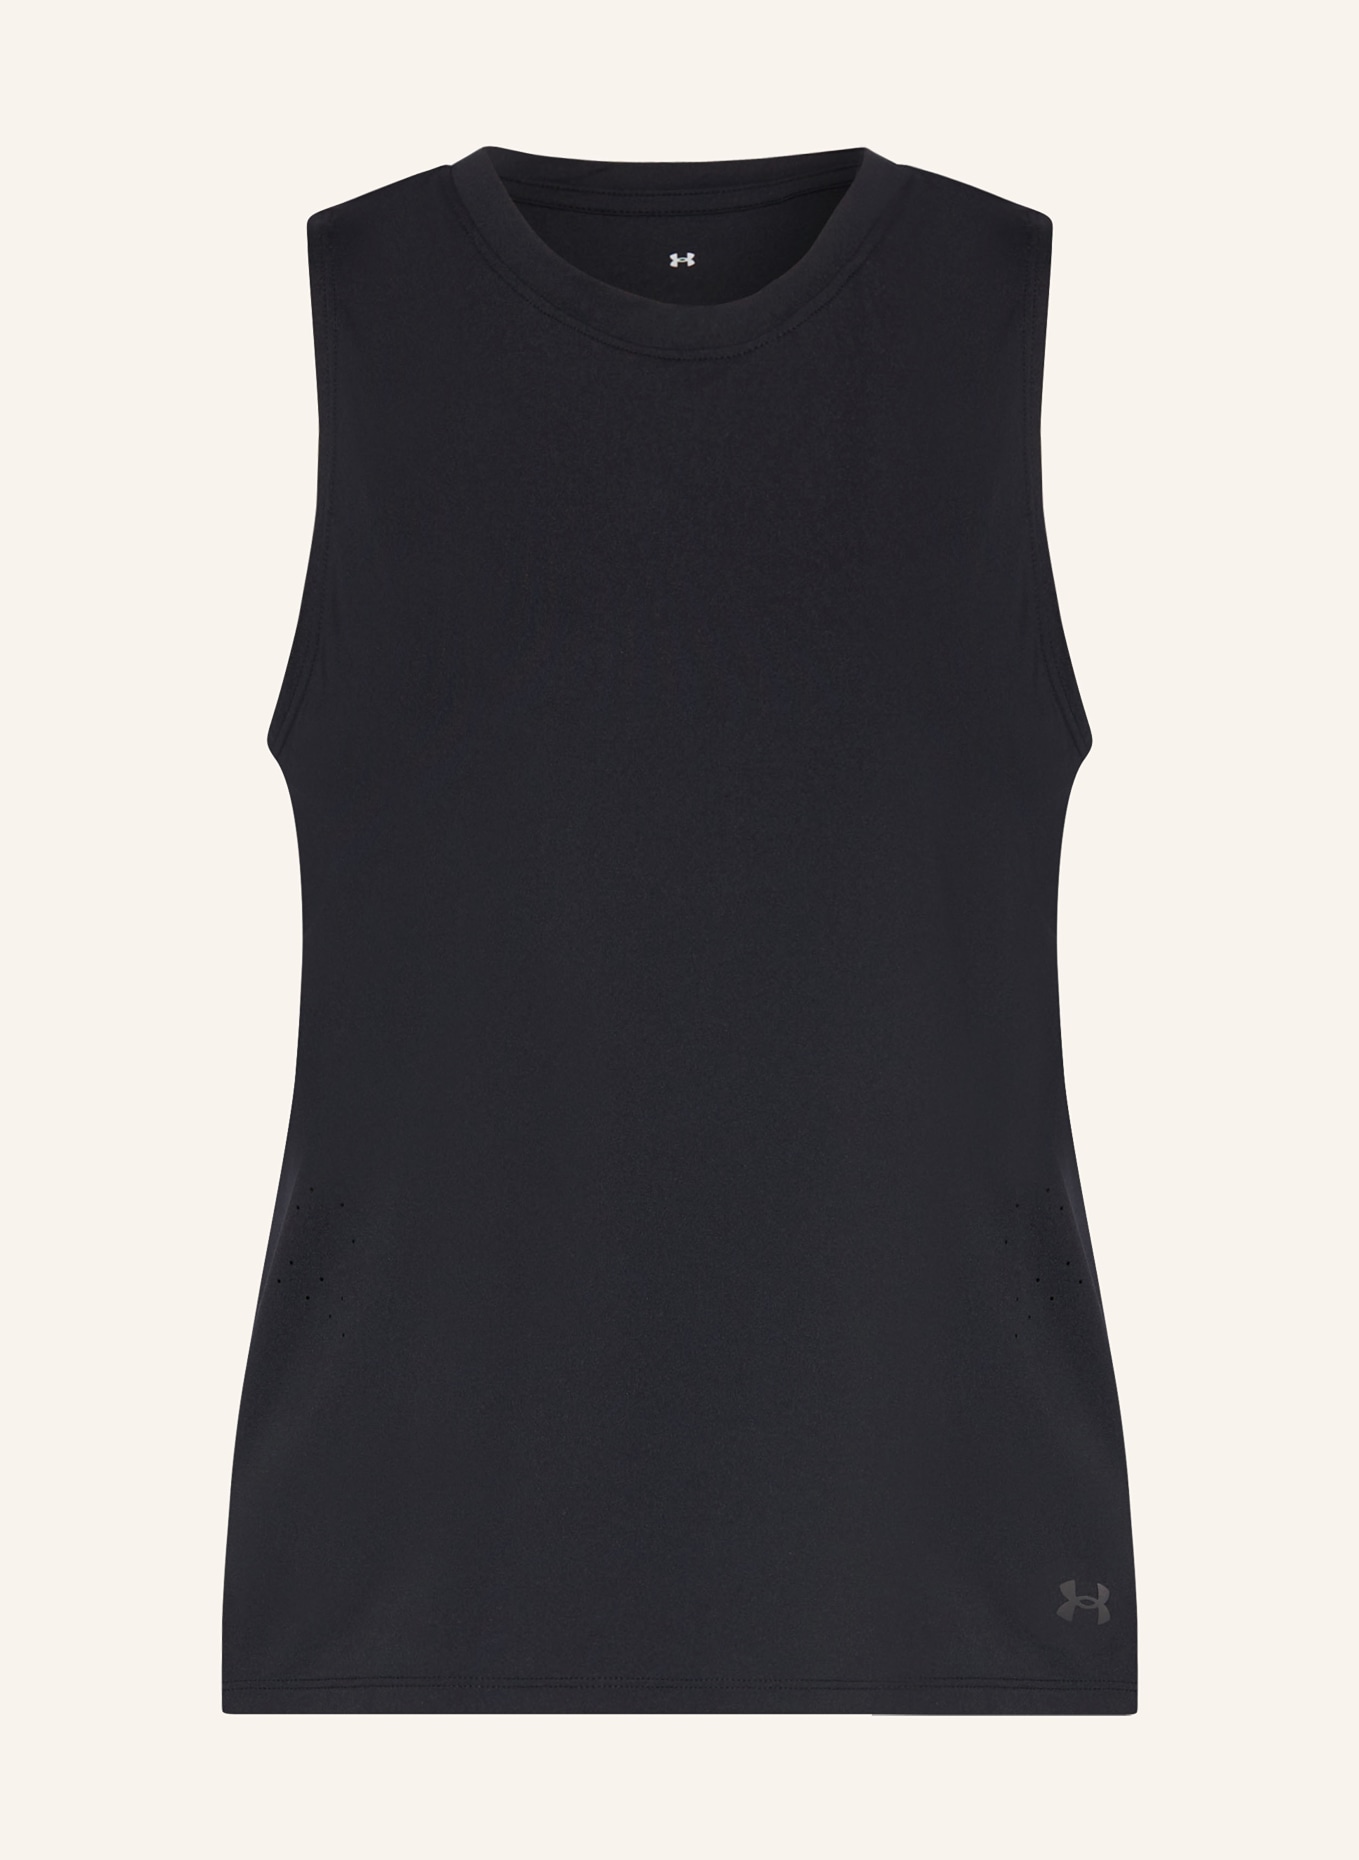 UNDER ARMOUR Running top LAUNCH ELITE, Color: BLACK (Image 1)